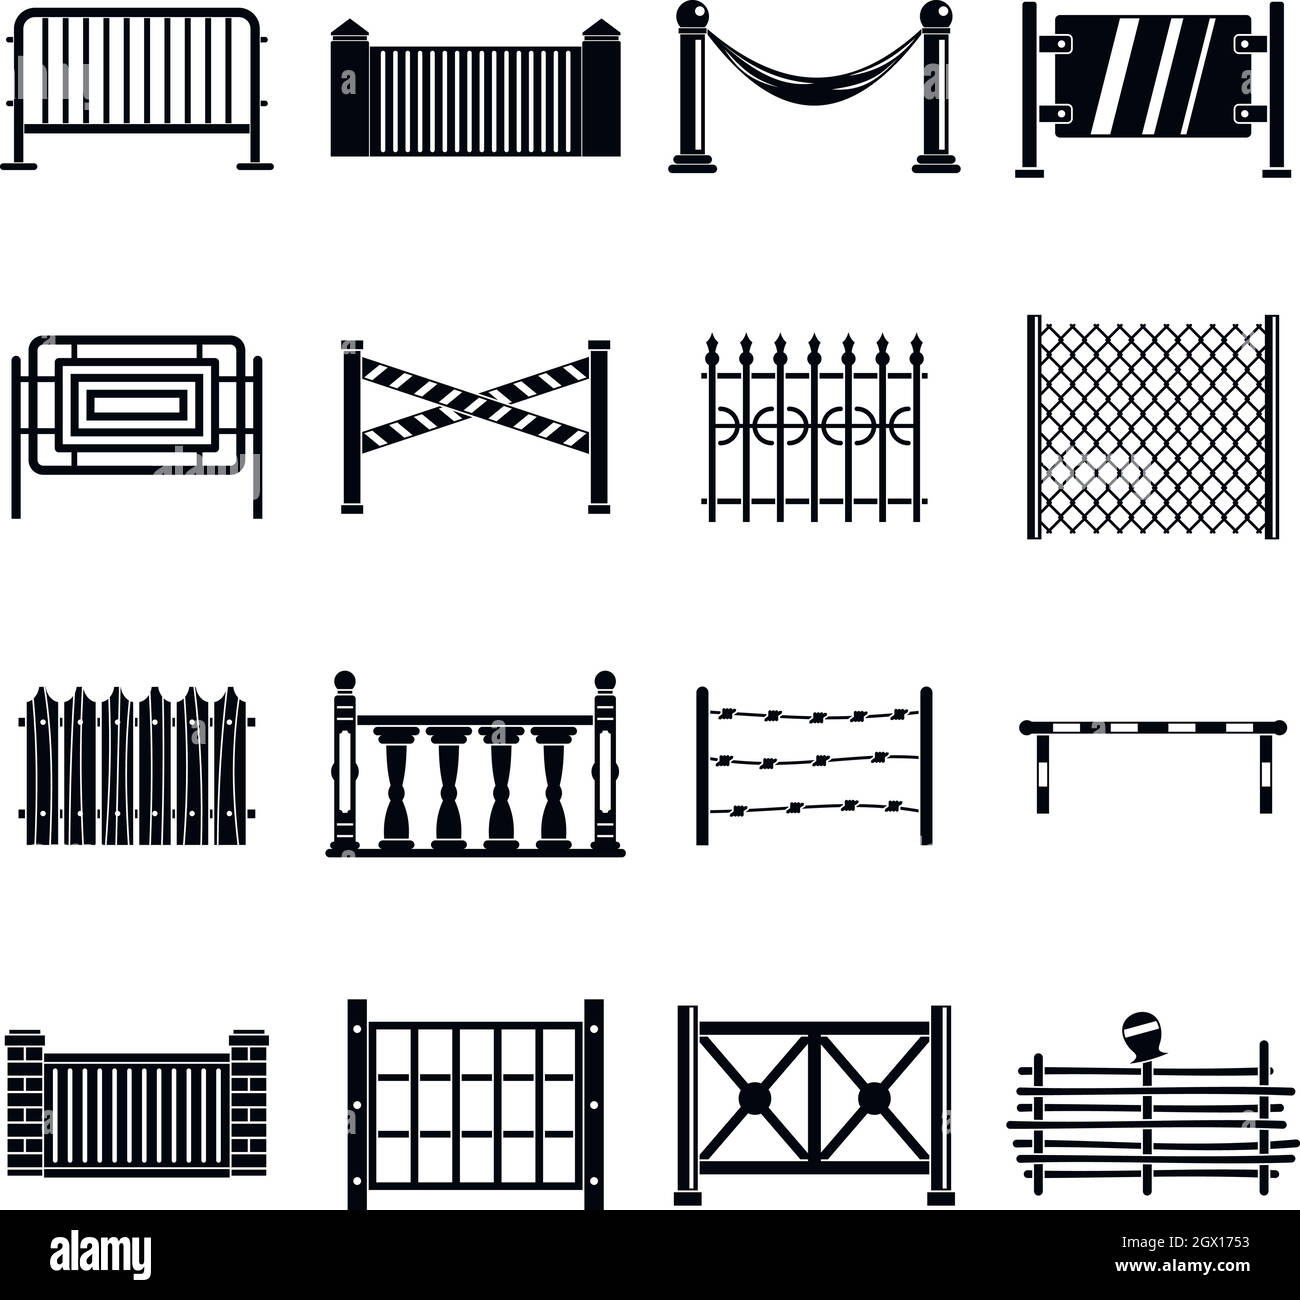 Fencing icons set, simple style Stock Vector